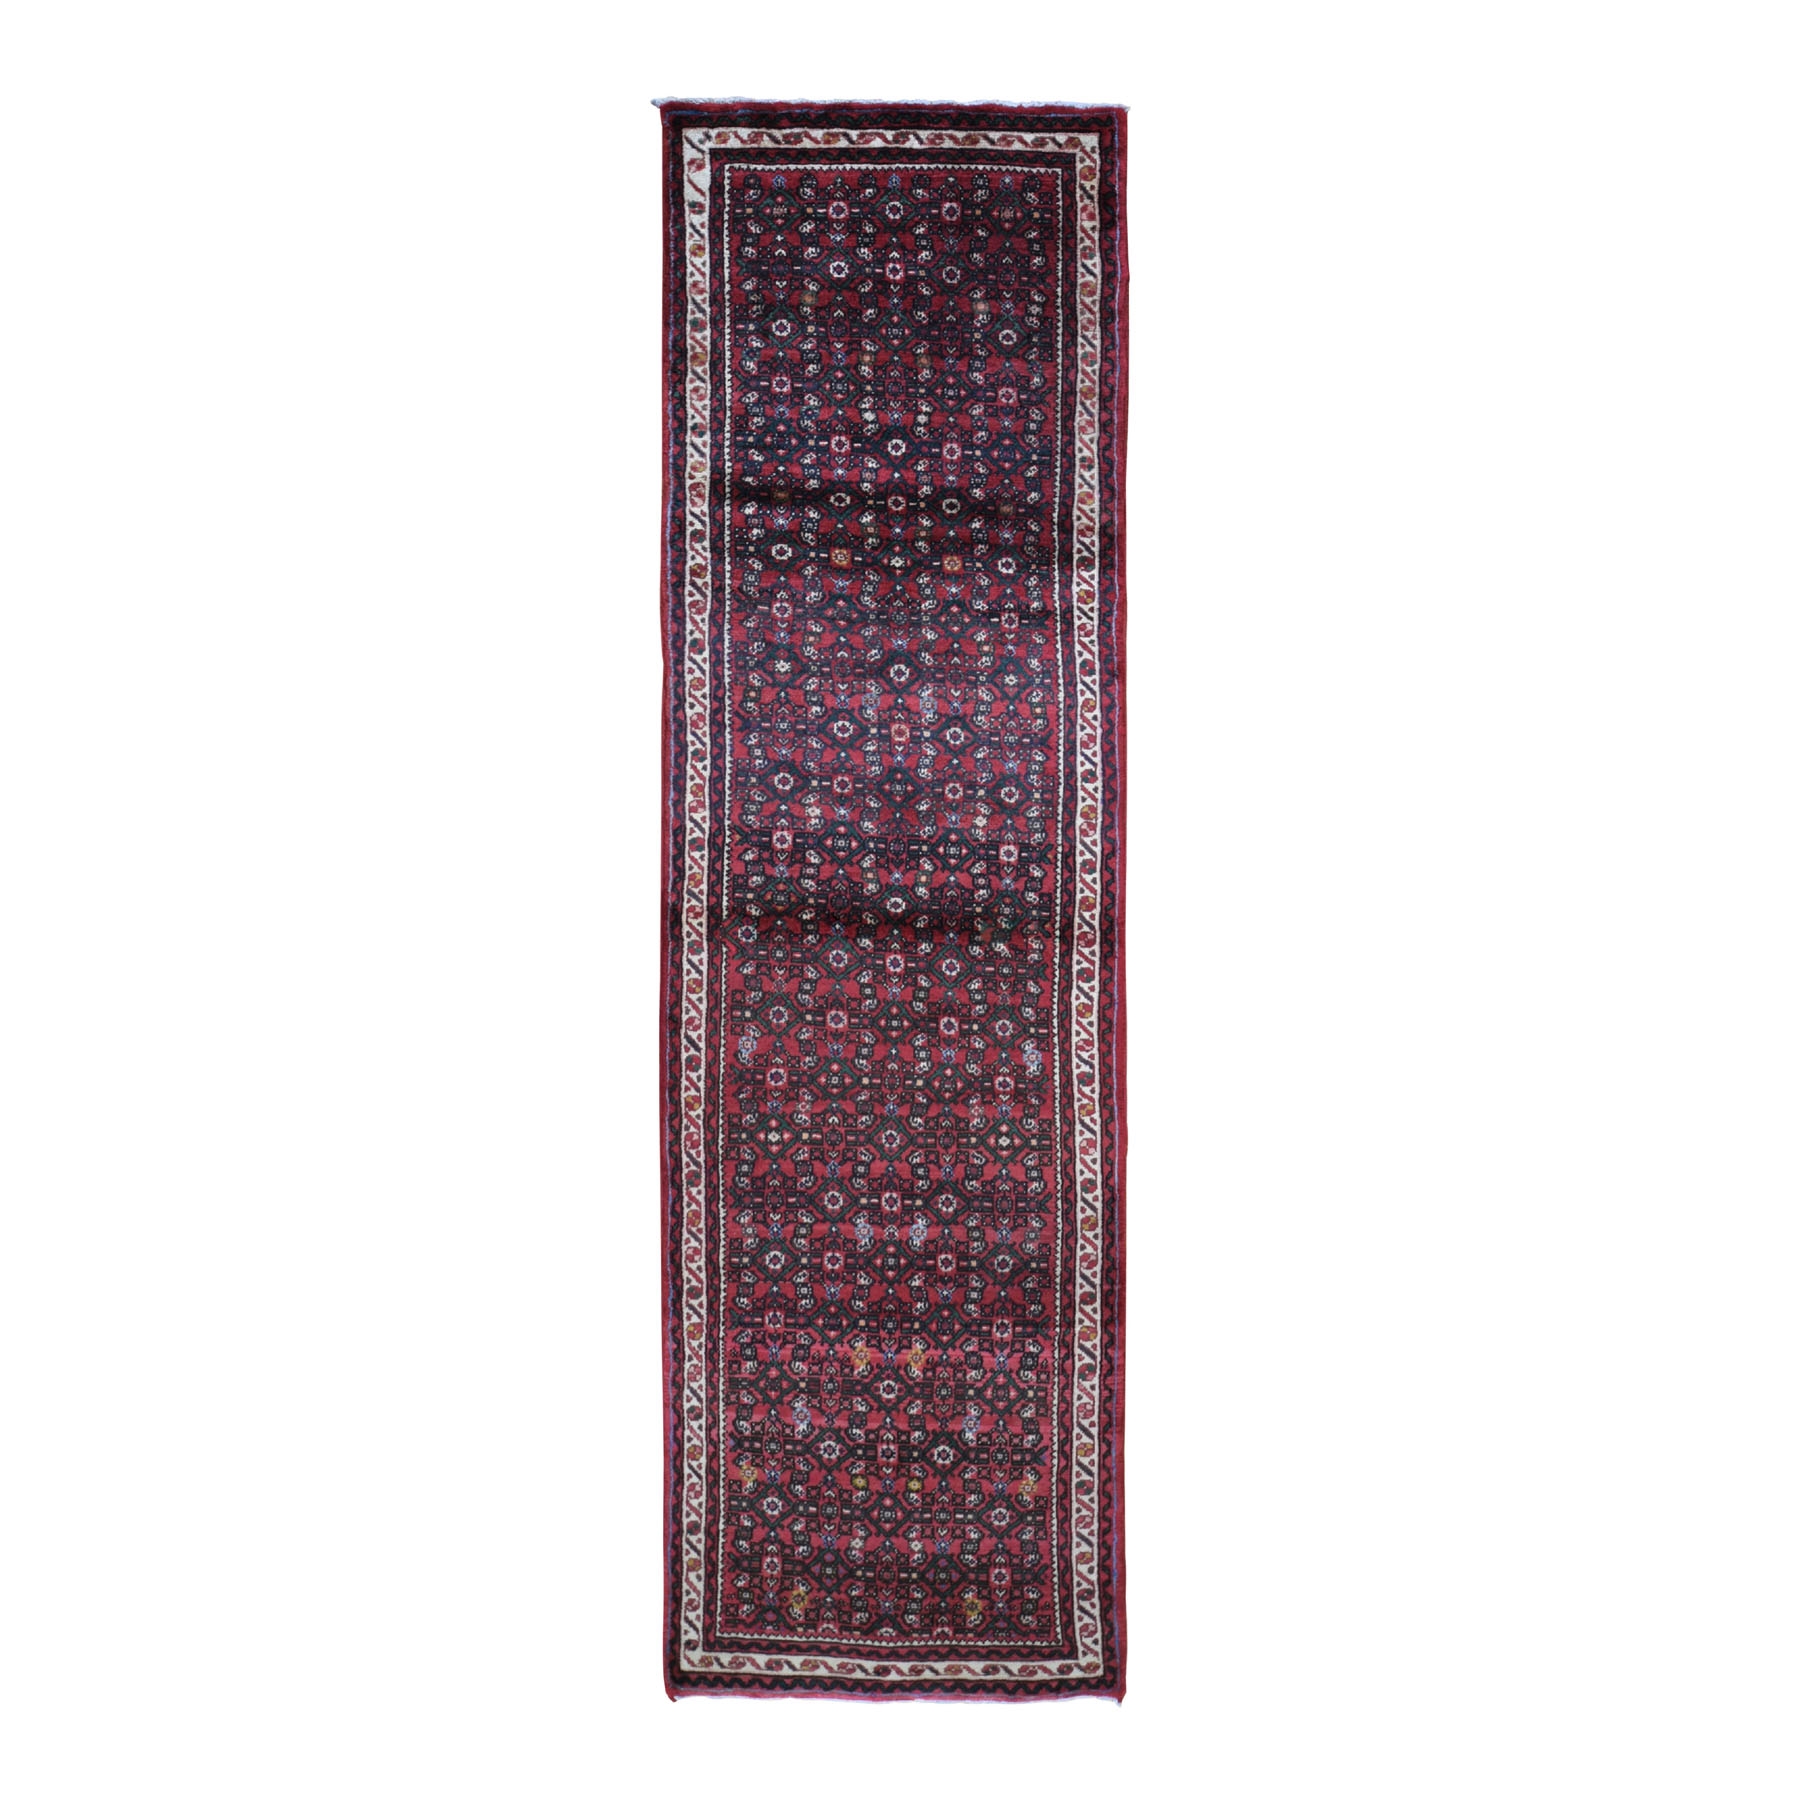 2'8"X9'4" Red New Persian Hamadan Fish Herat Design Hand Knotted Oriental Rug moad9ea7